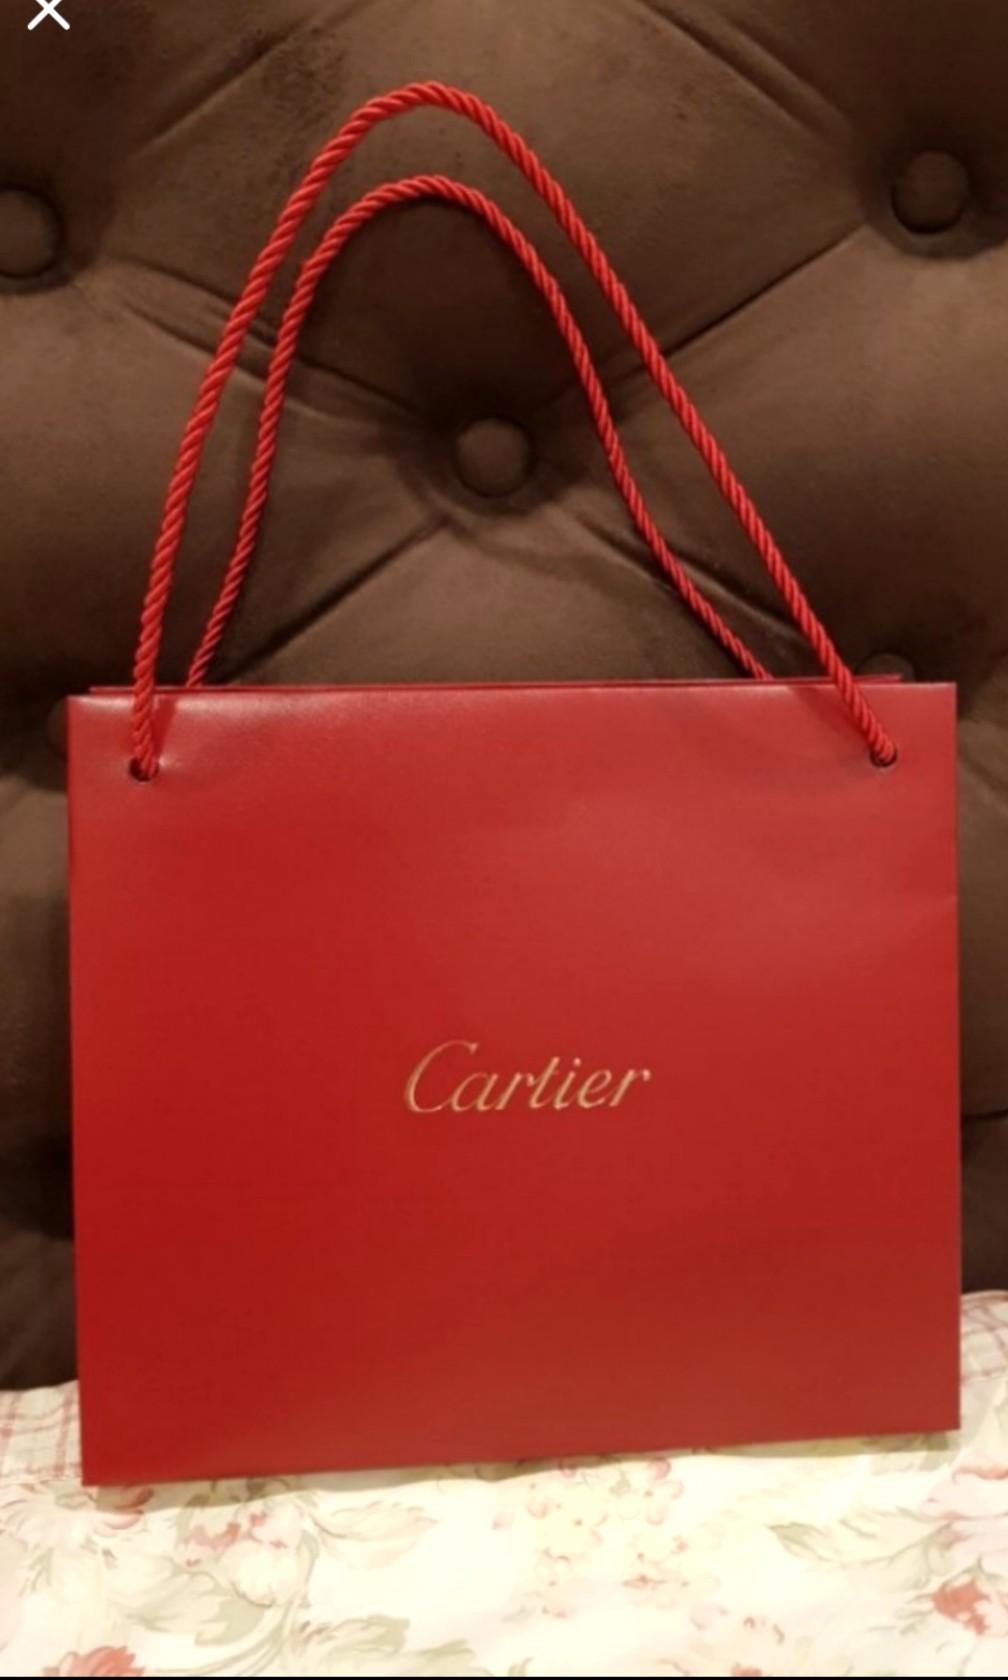 NEW Authentic Cartier Small Shopping Gift Paper Bag Gold Logo 8”X7”